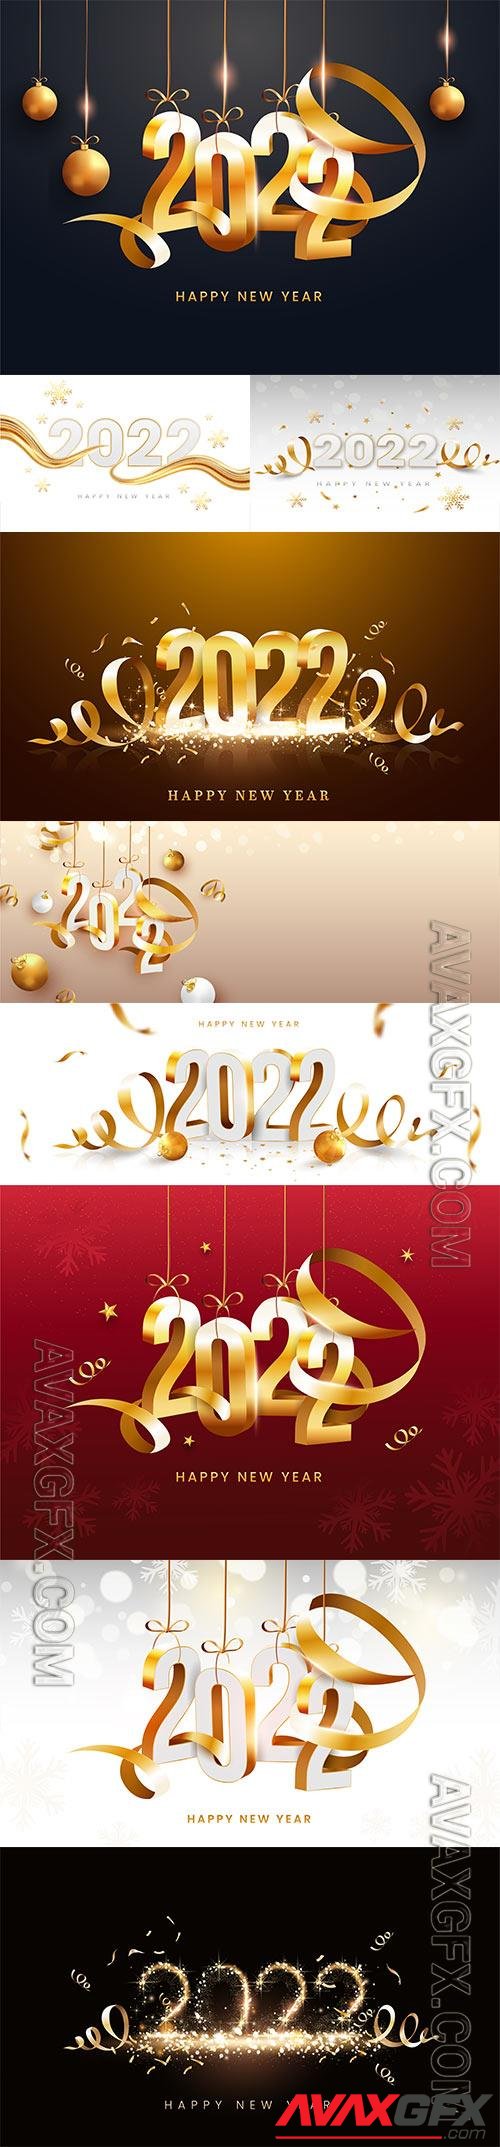 3d 2022 number hang with golden curl ribbons and baubles on peach bokeh background